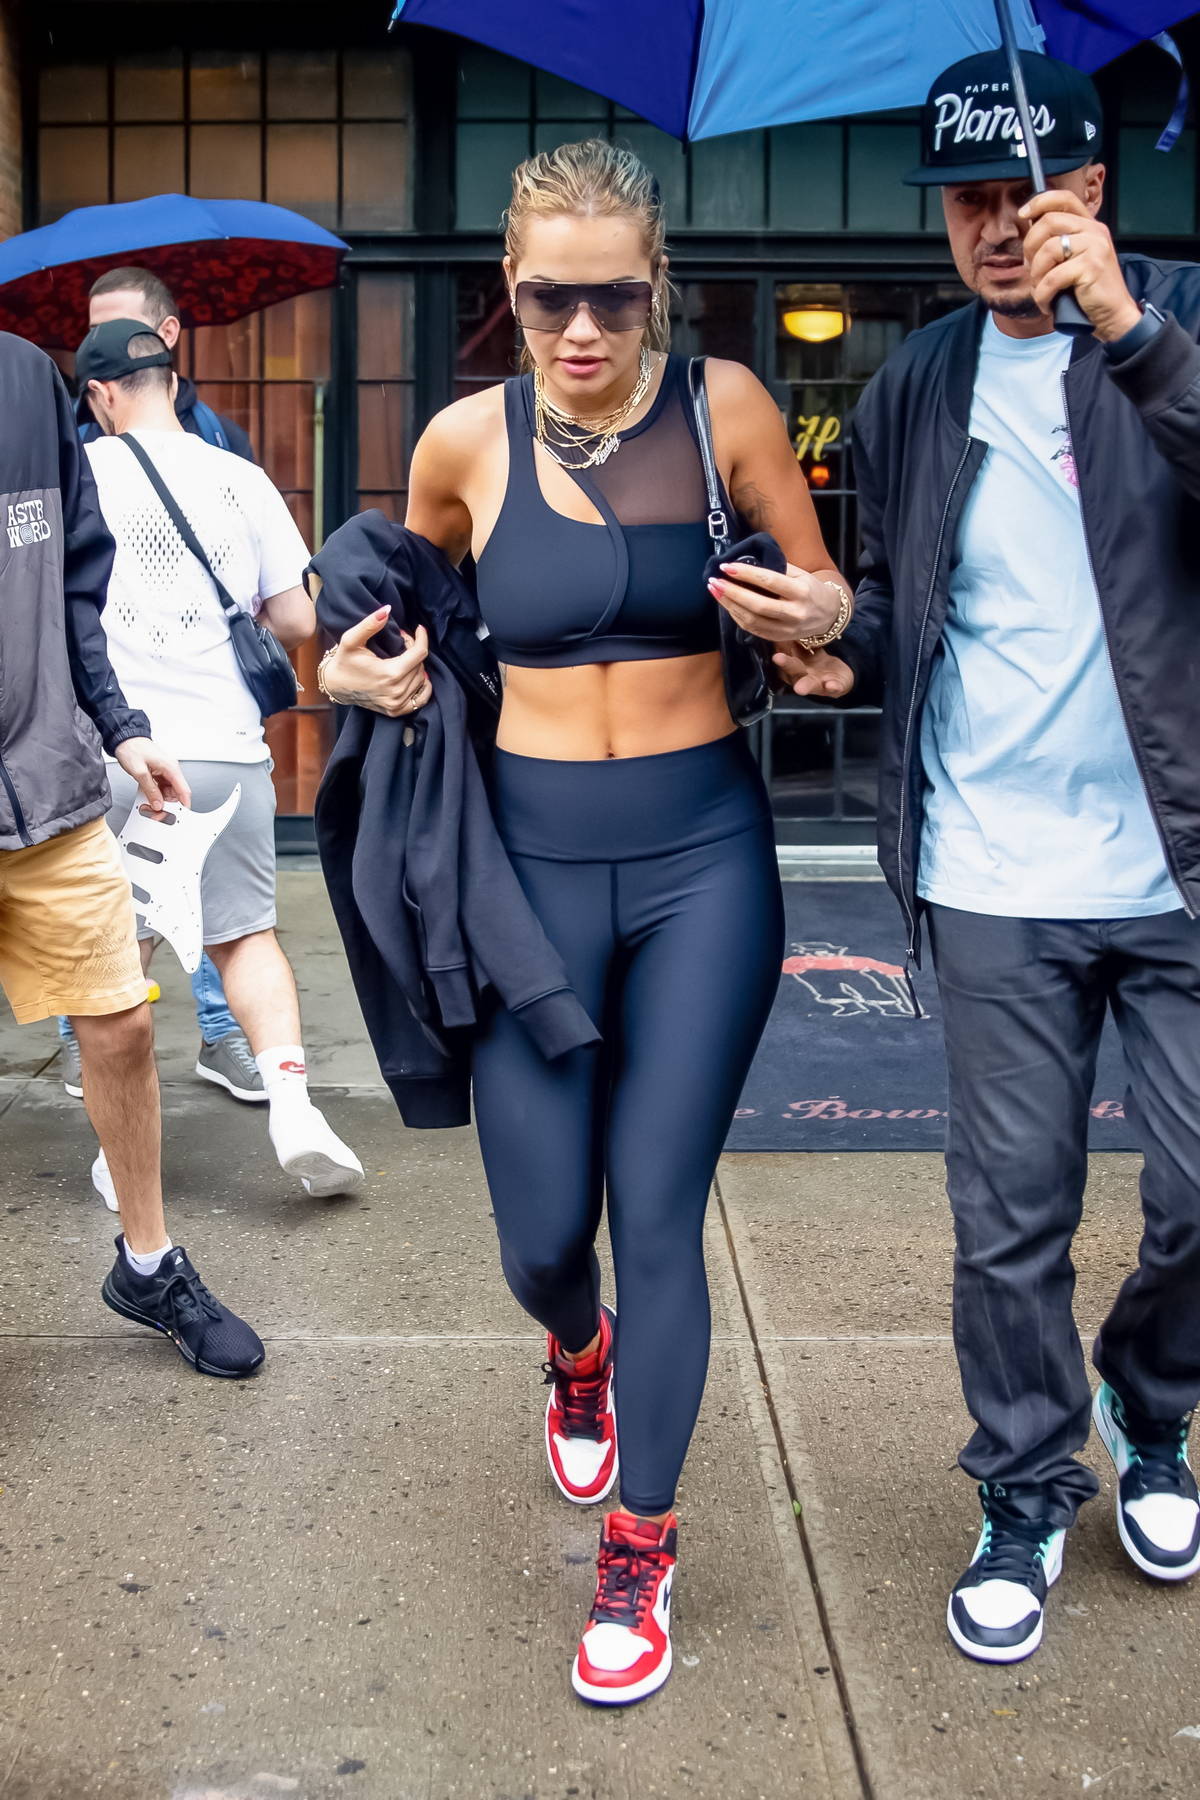 Rita Ora shows off her toned abs in a black sports bra and leggings while  heading